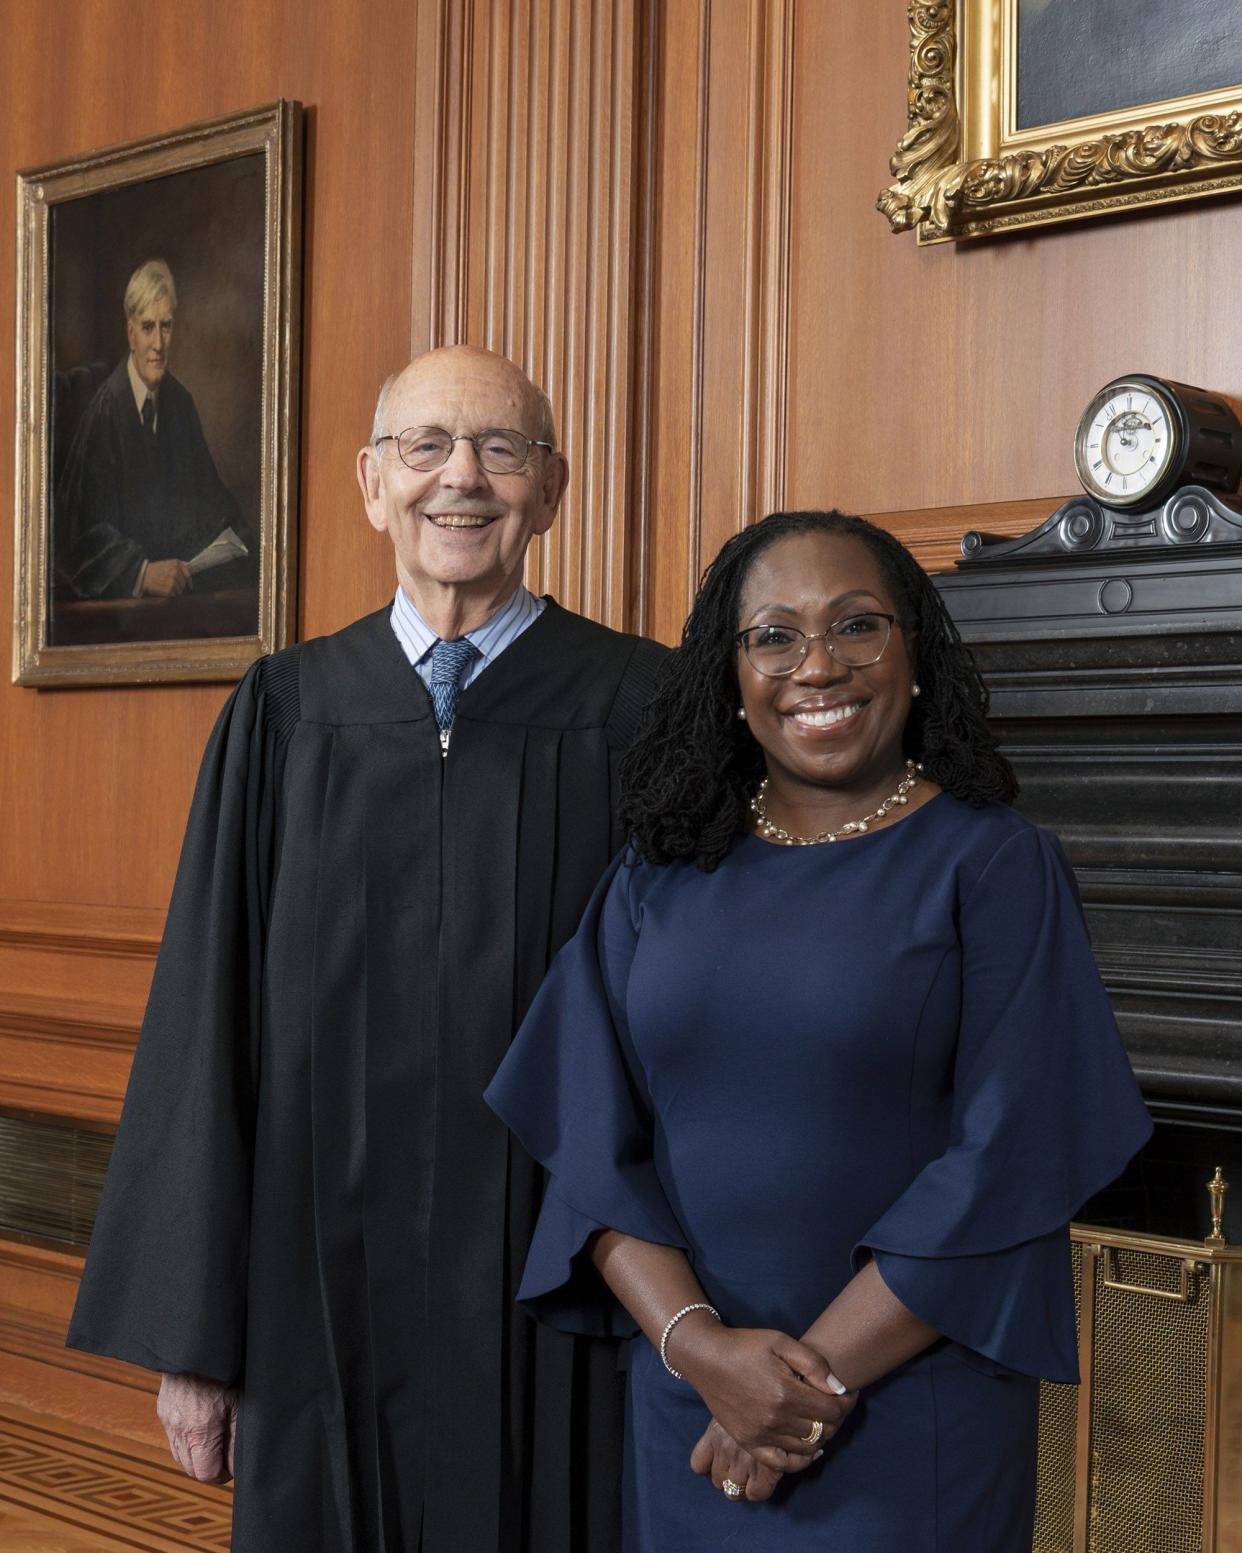 In this image provided by the Collection of the Supreme Court of the United States, retired Supreme Court Justice Stephen Breyer poses for a photo with Supreme Court Justice Ketanji Brown Jackson at the Supreme Court in Washington, Thursday, June 30, 2022. 